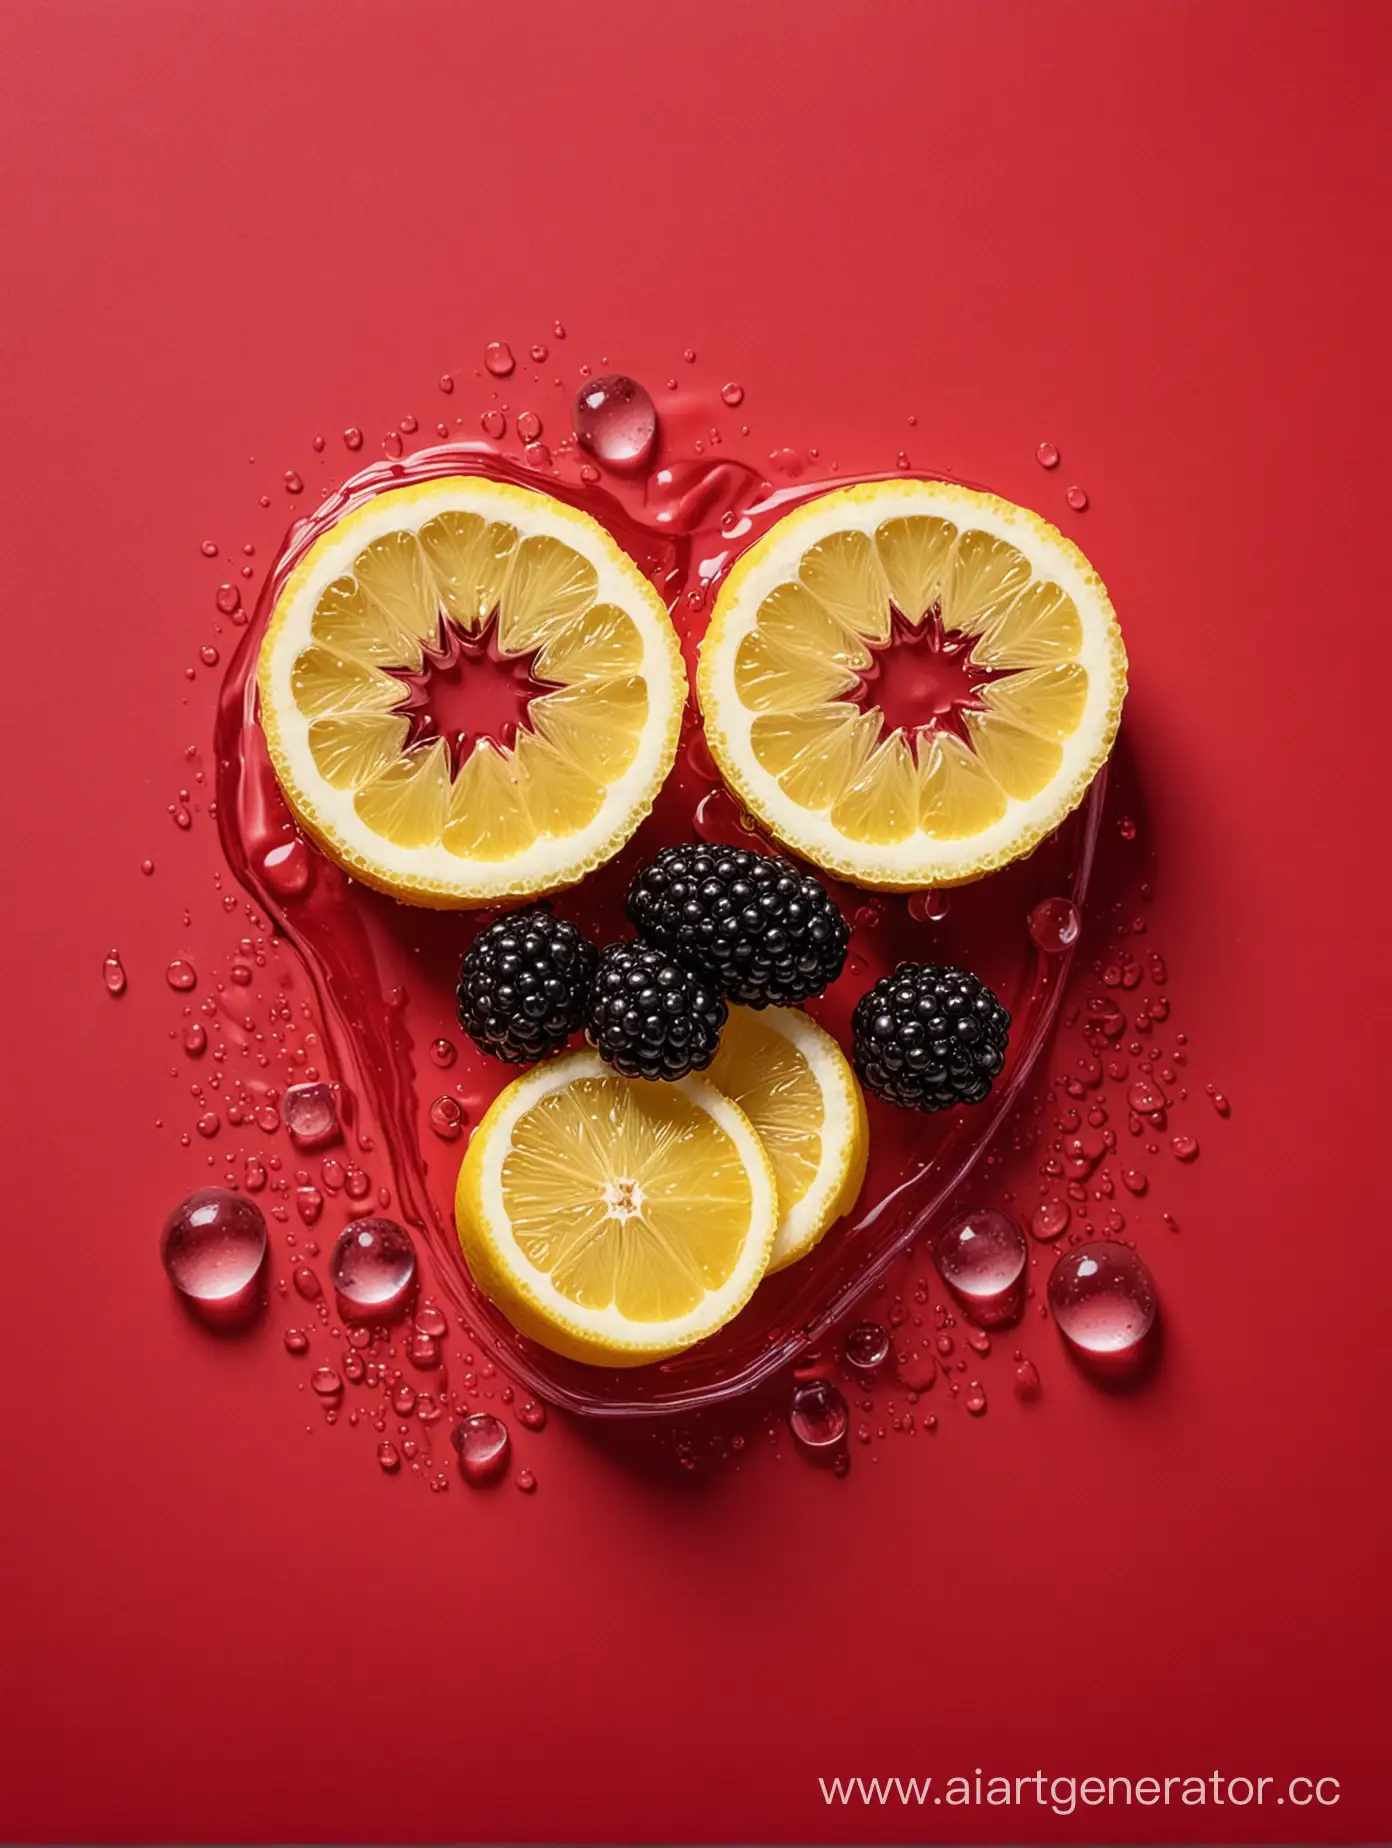 Boysenberry with lemon slices water drop on RED background